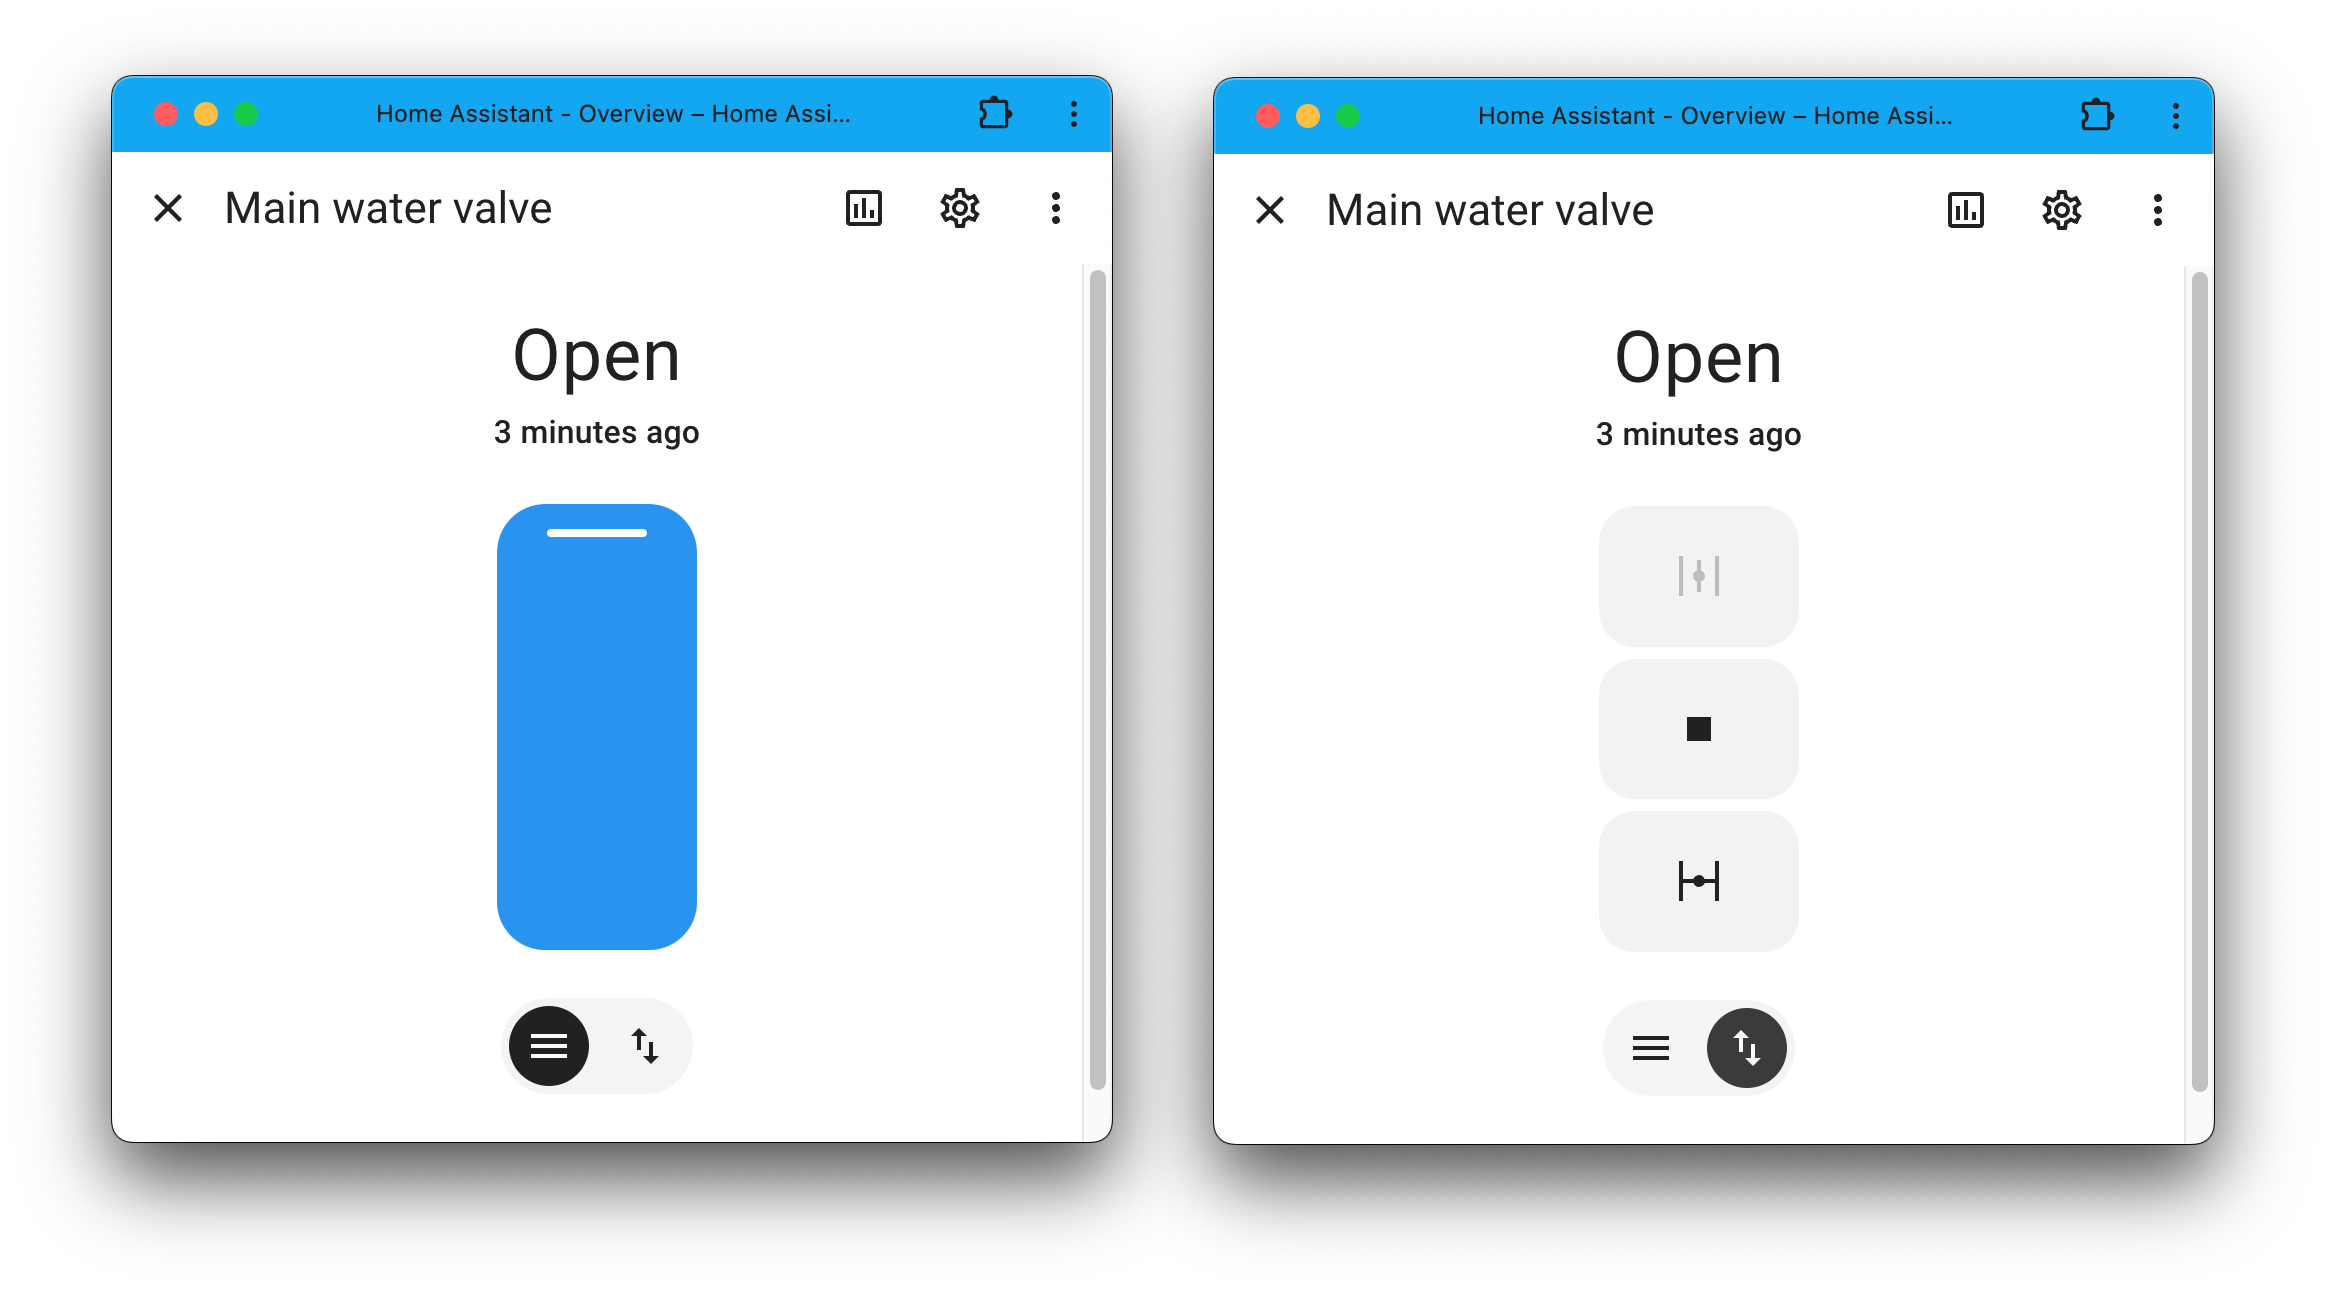 Screenshot showing a valve entity in the Home Assistant UI.